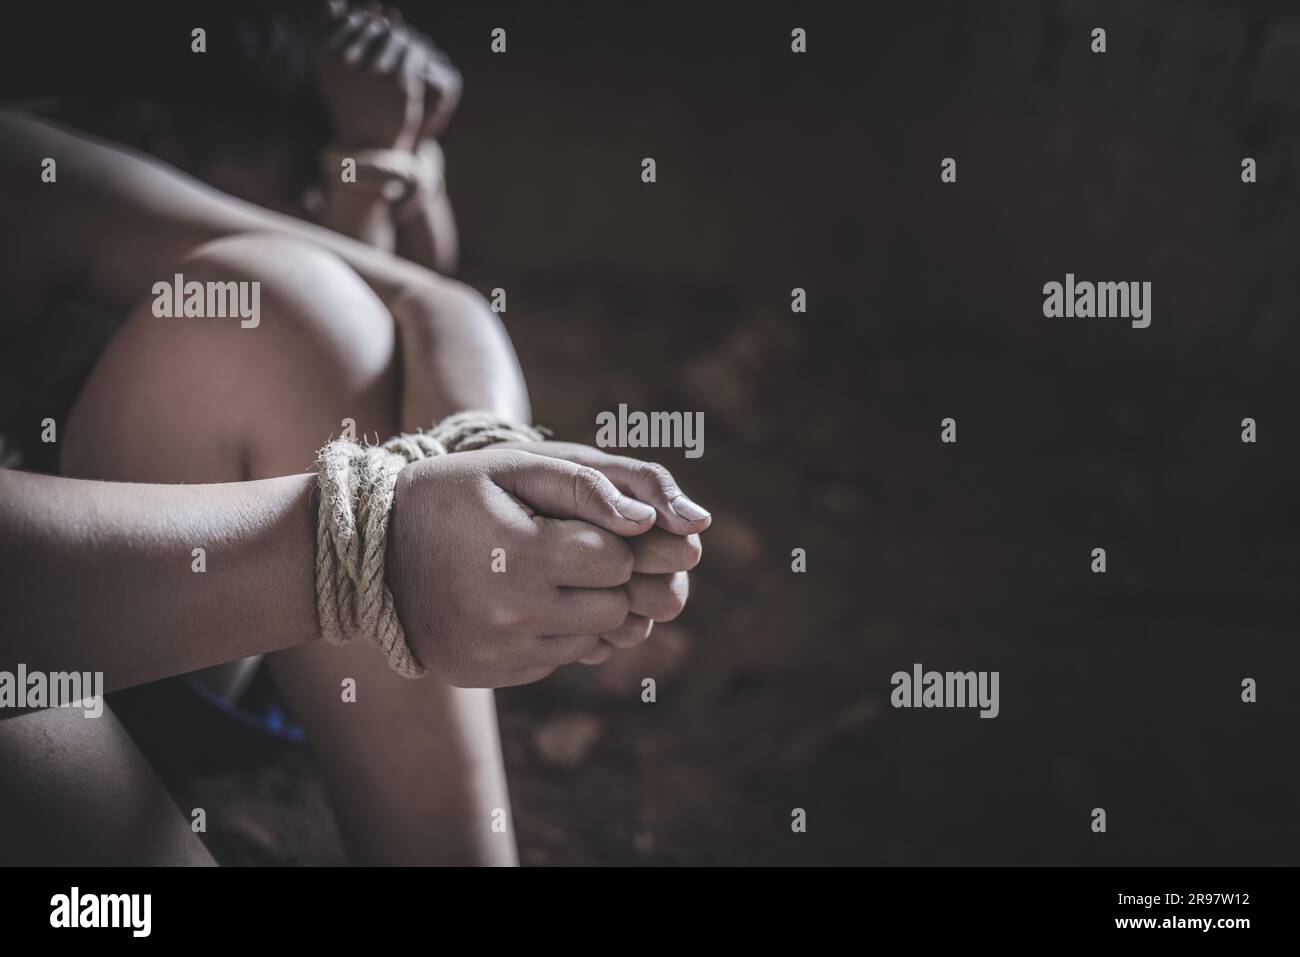 Hands of a missing kidnapped, abused, hostage, victim woman tied up with rope in emotional stress and pain, Human trafficking ,Stop abusing violence. Stock Photo